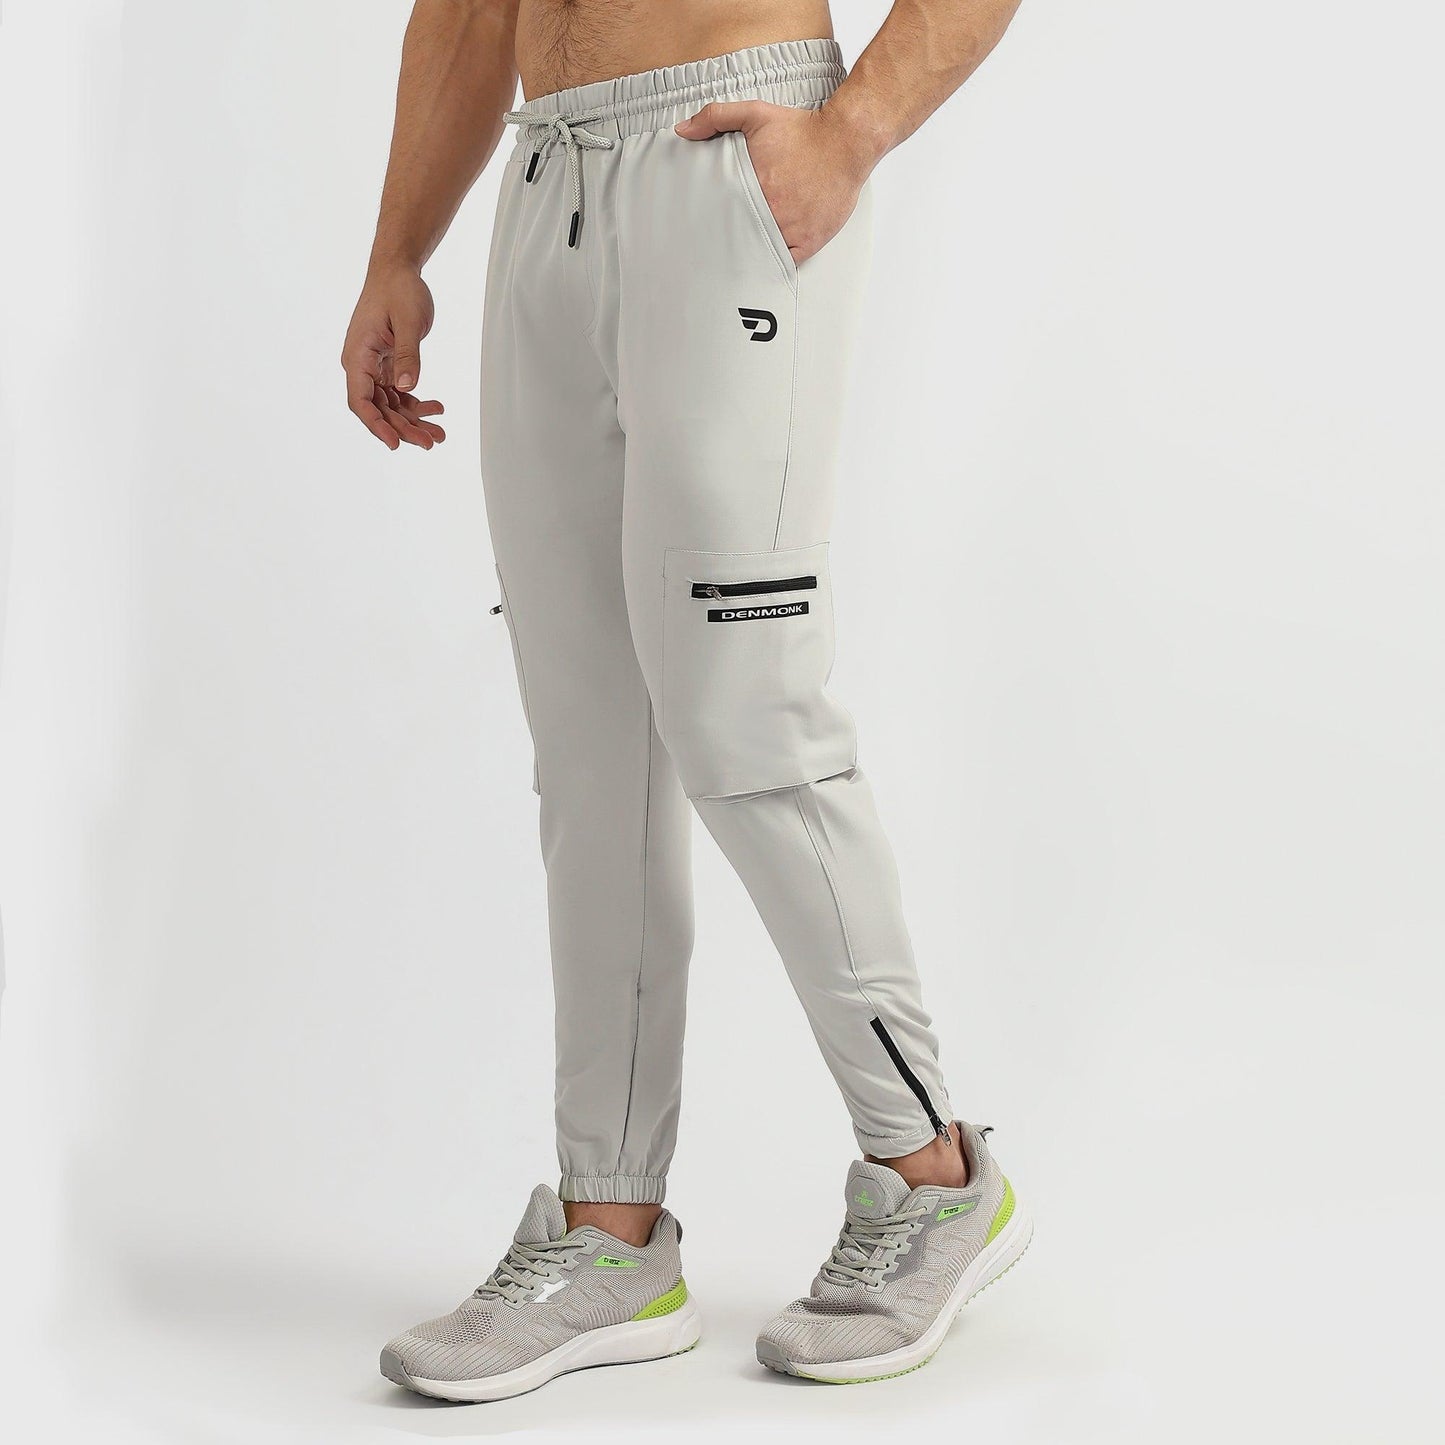 Denmonk: Elevate your look with these Treckcrago sharp light grey Trackpant for mens.